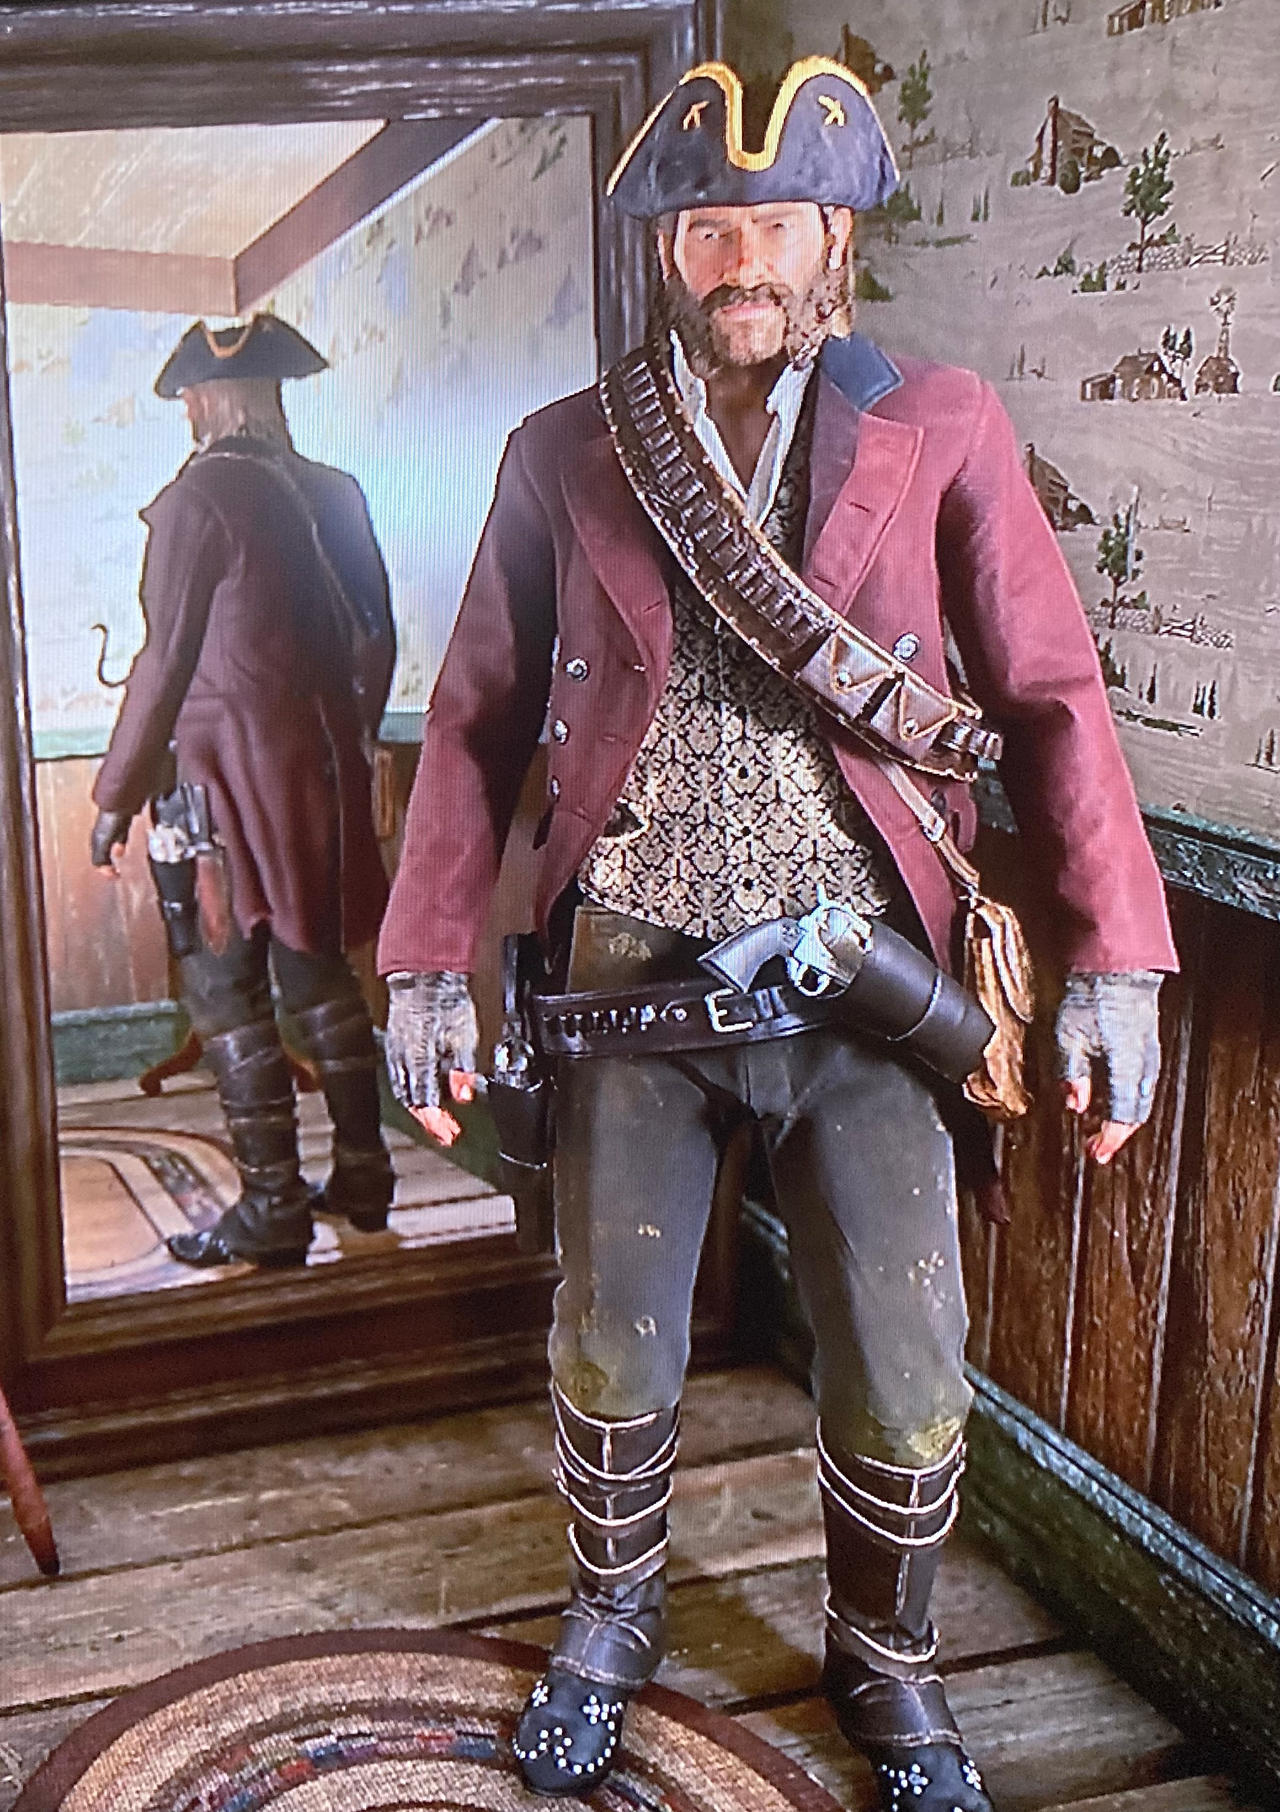 Dead Redemption - Pirate Outfit by siil3ntj on DeviantArt